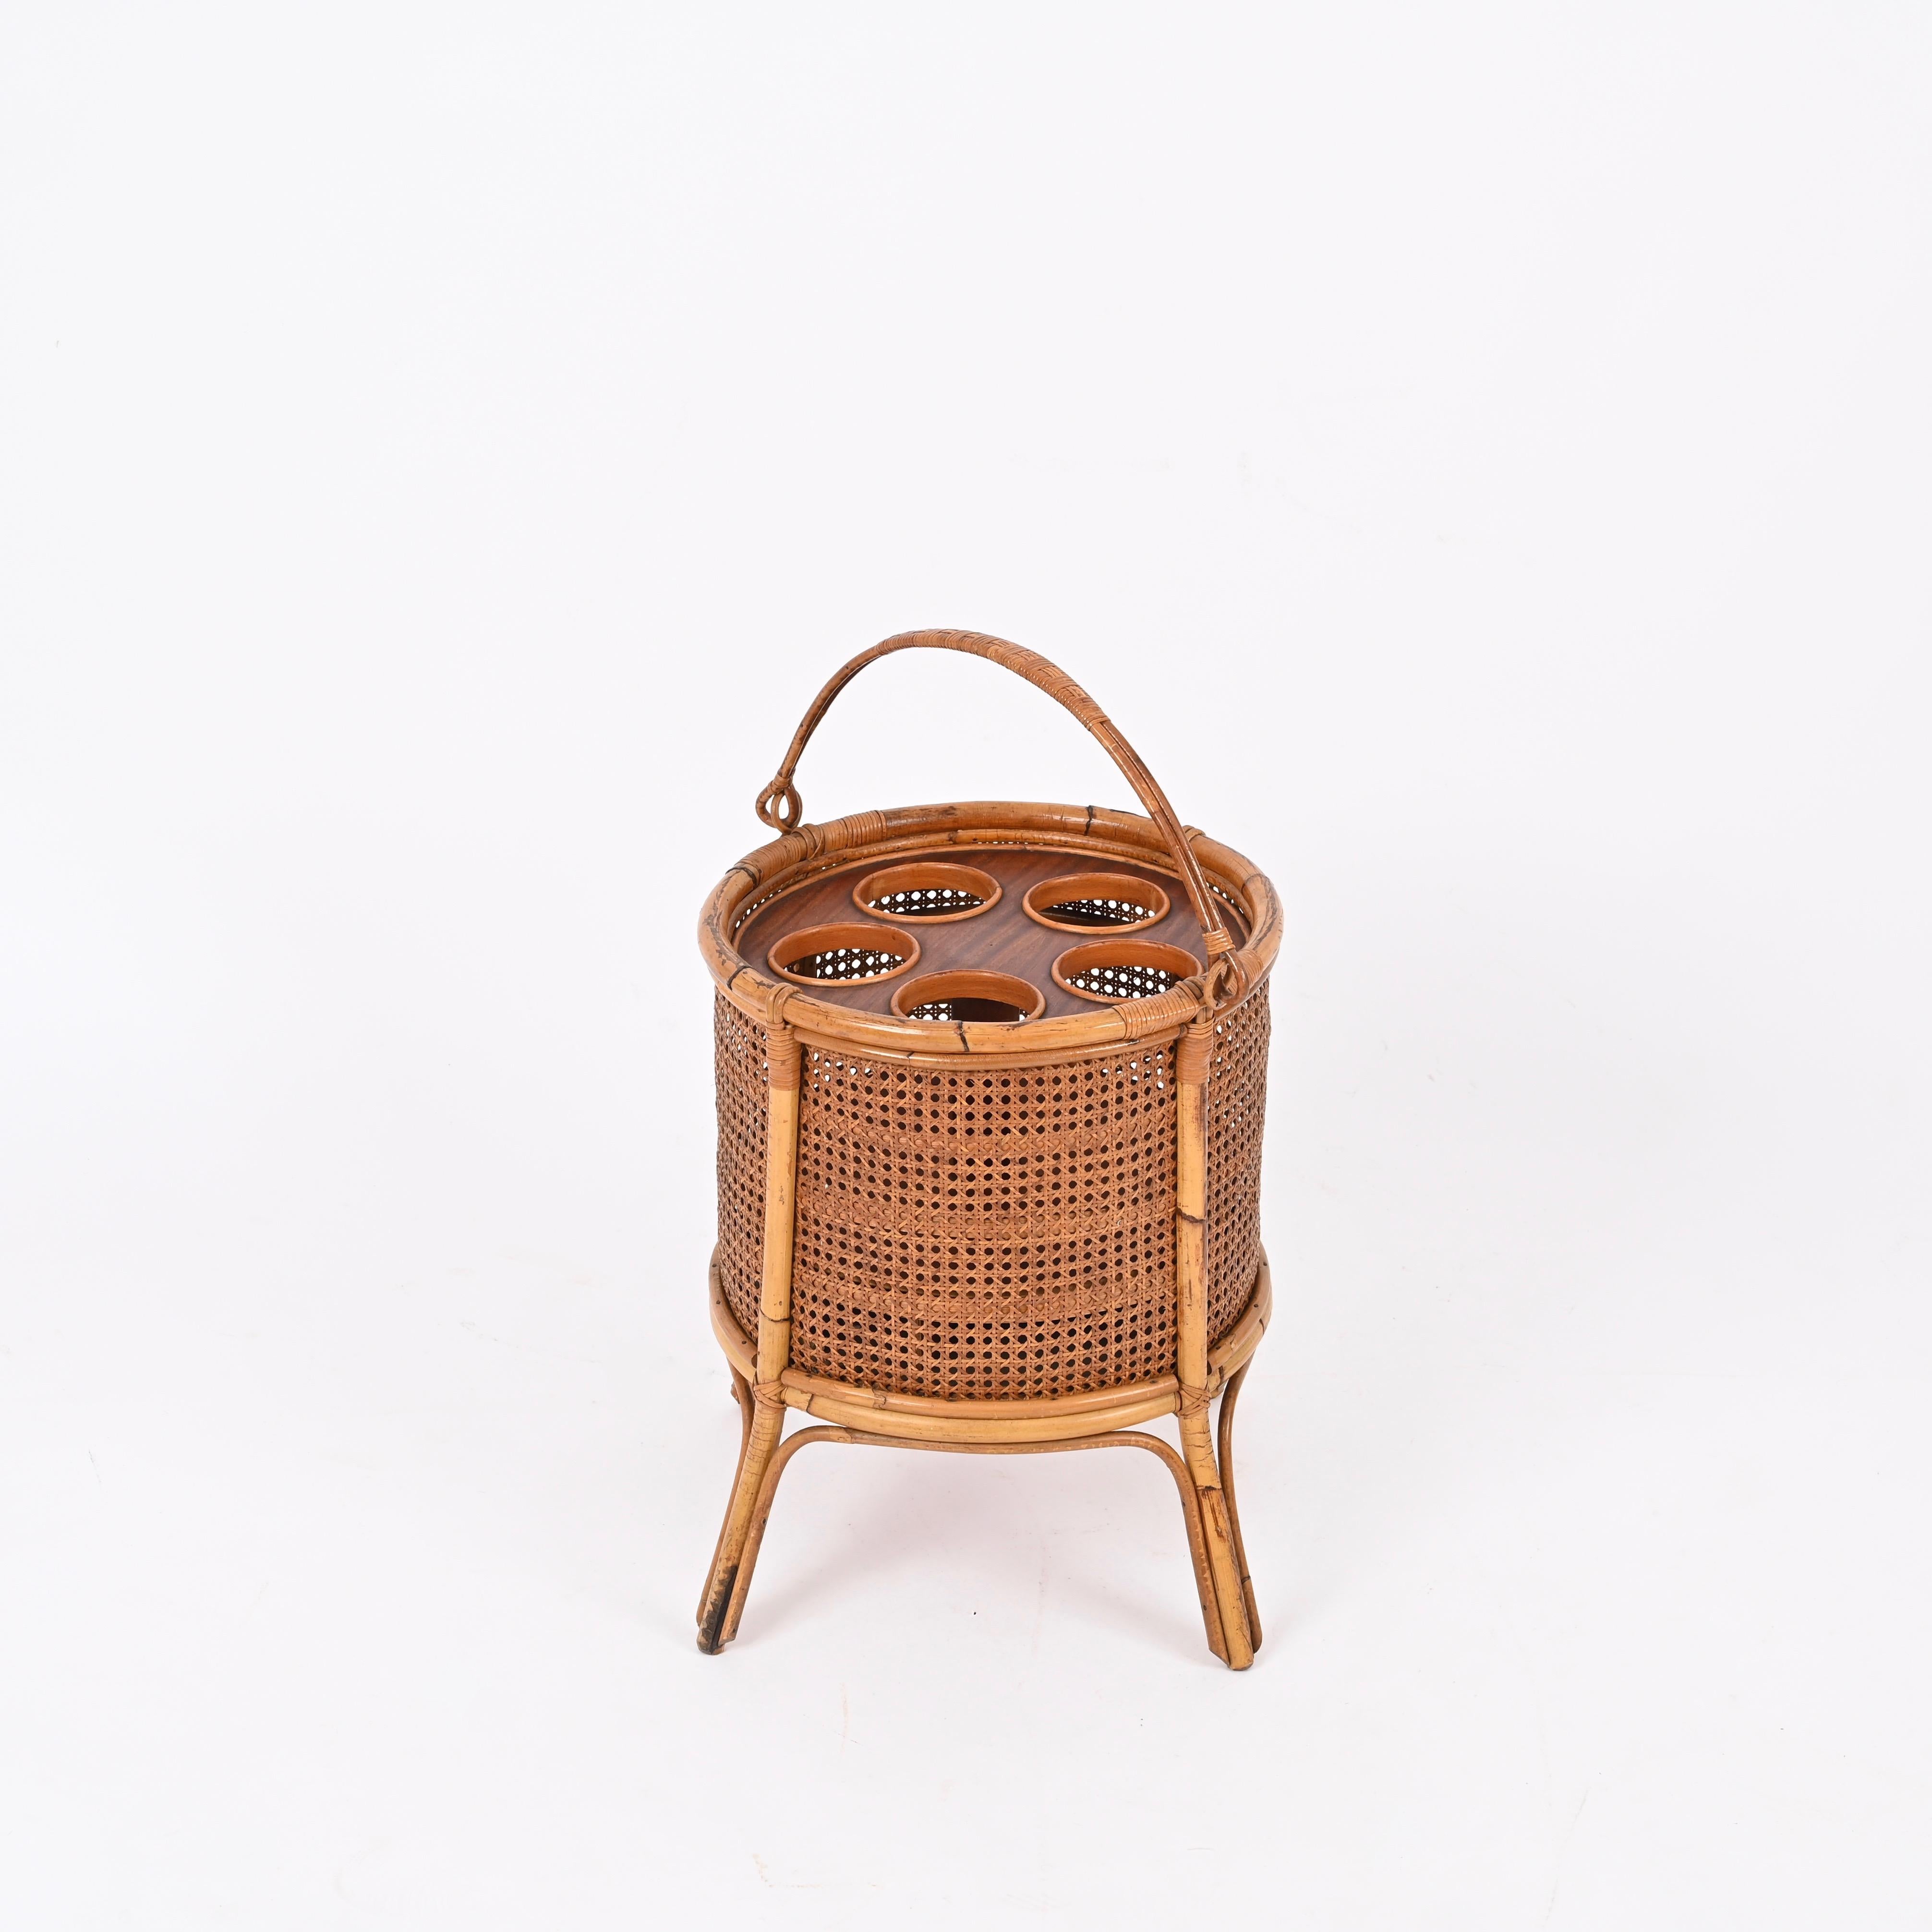 Delightful Mid-Century French Riviera style bottle holder made in a stunning combination of hand-woven Vienna straw, rattan, wicker and wood.  This unique piece was designed in Italy in the 1960s.

Completely handcrafted with perfect proportions,